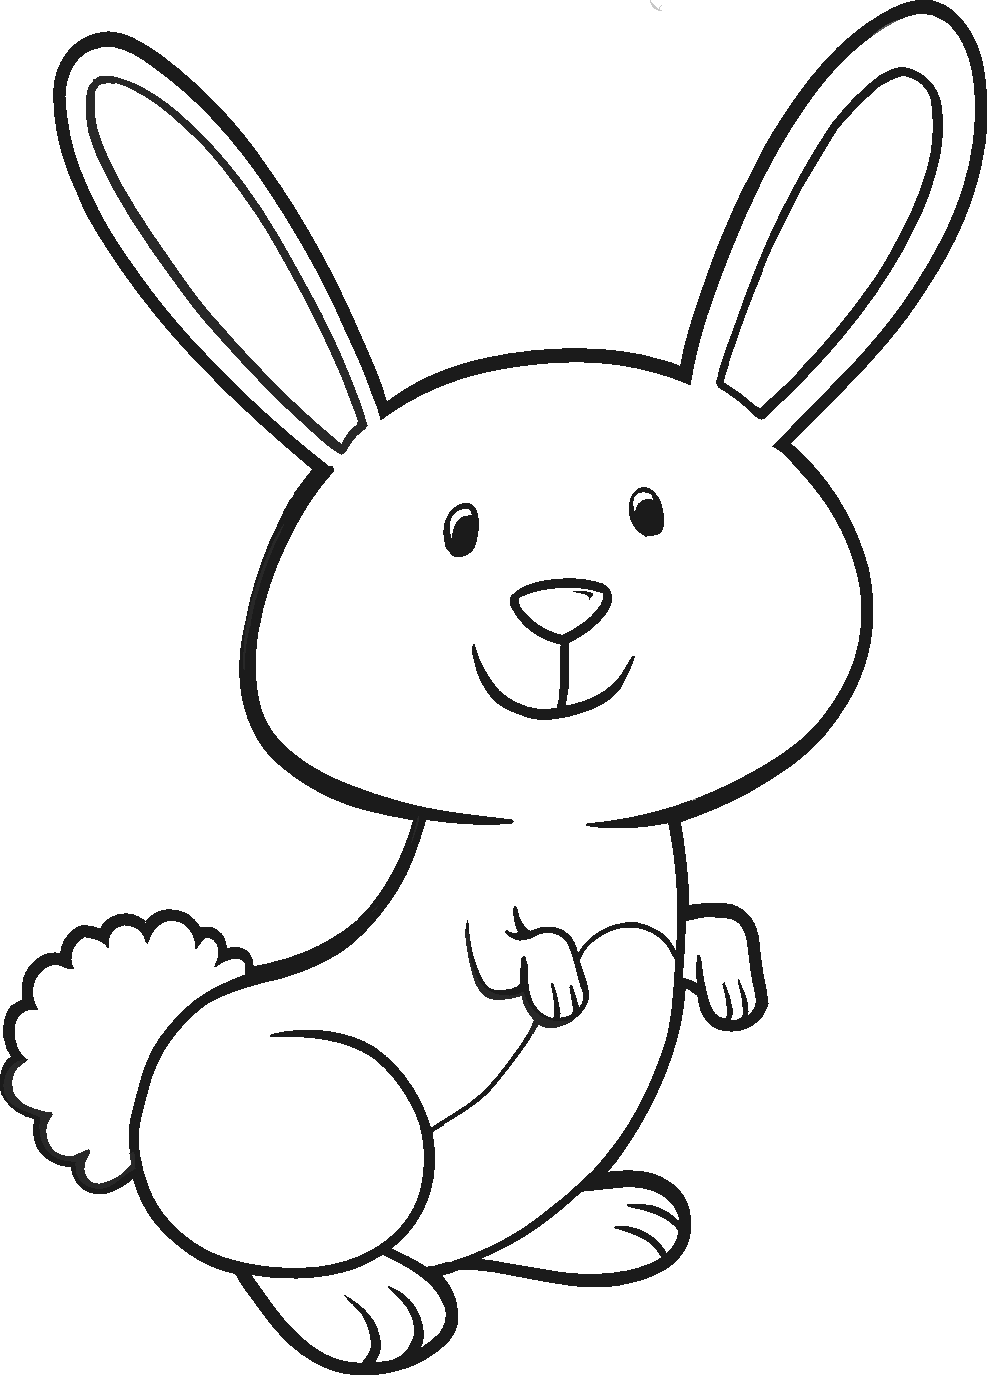 Bunny Coloring Pictures - Coloring Pages for Kids and for Adults